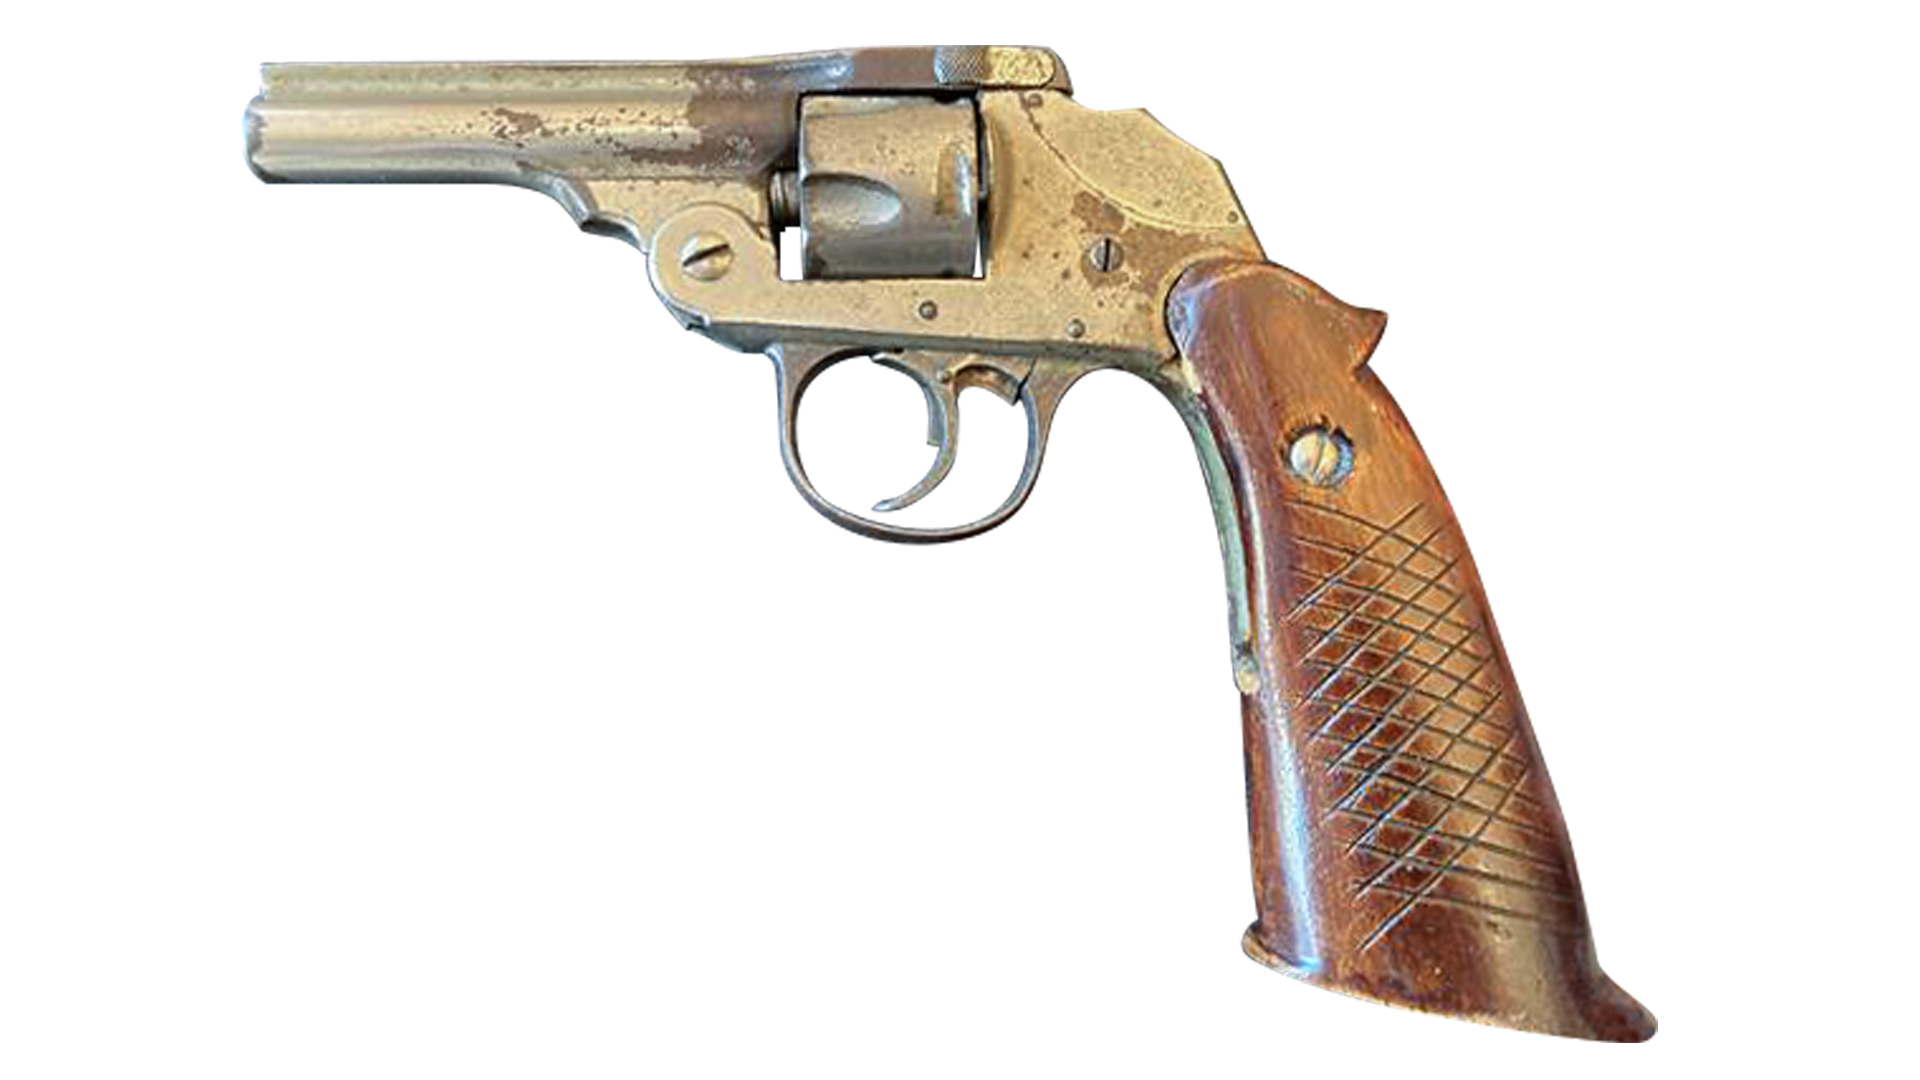 how to date a iver johnson revolver